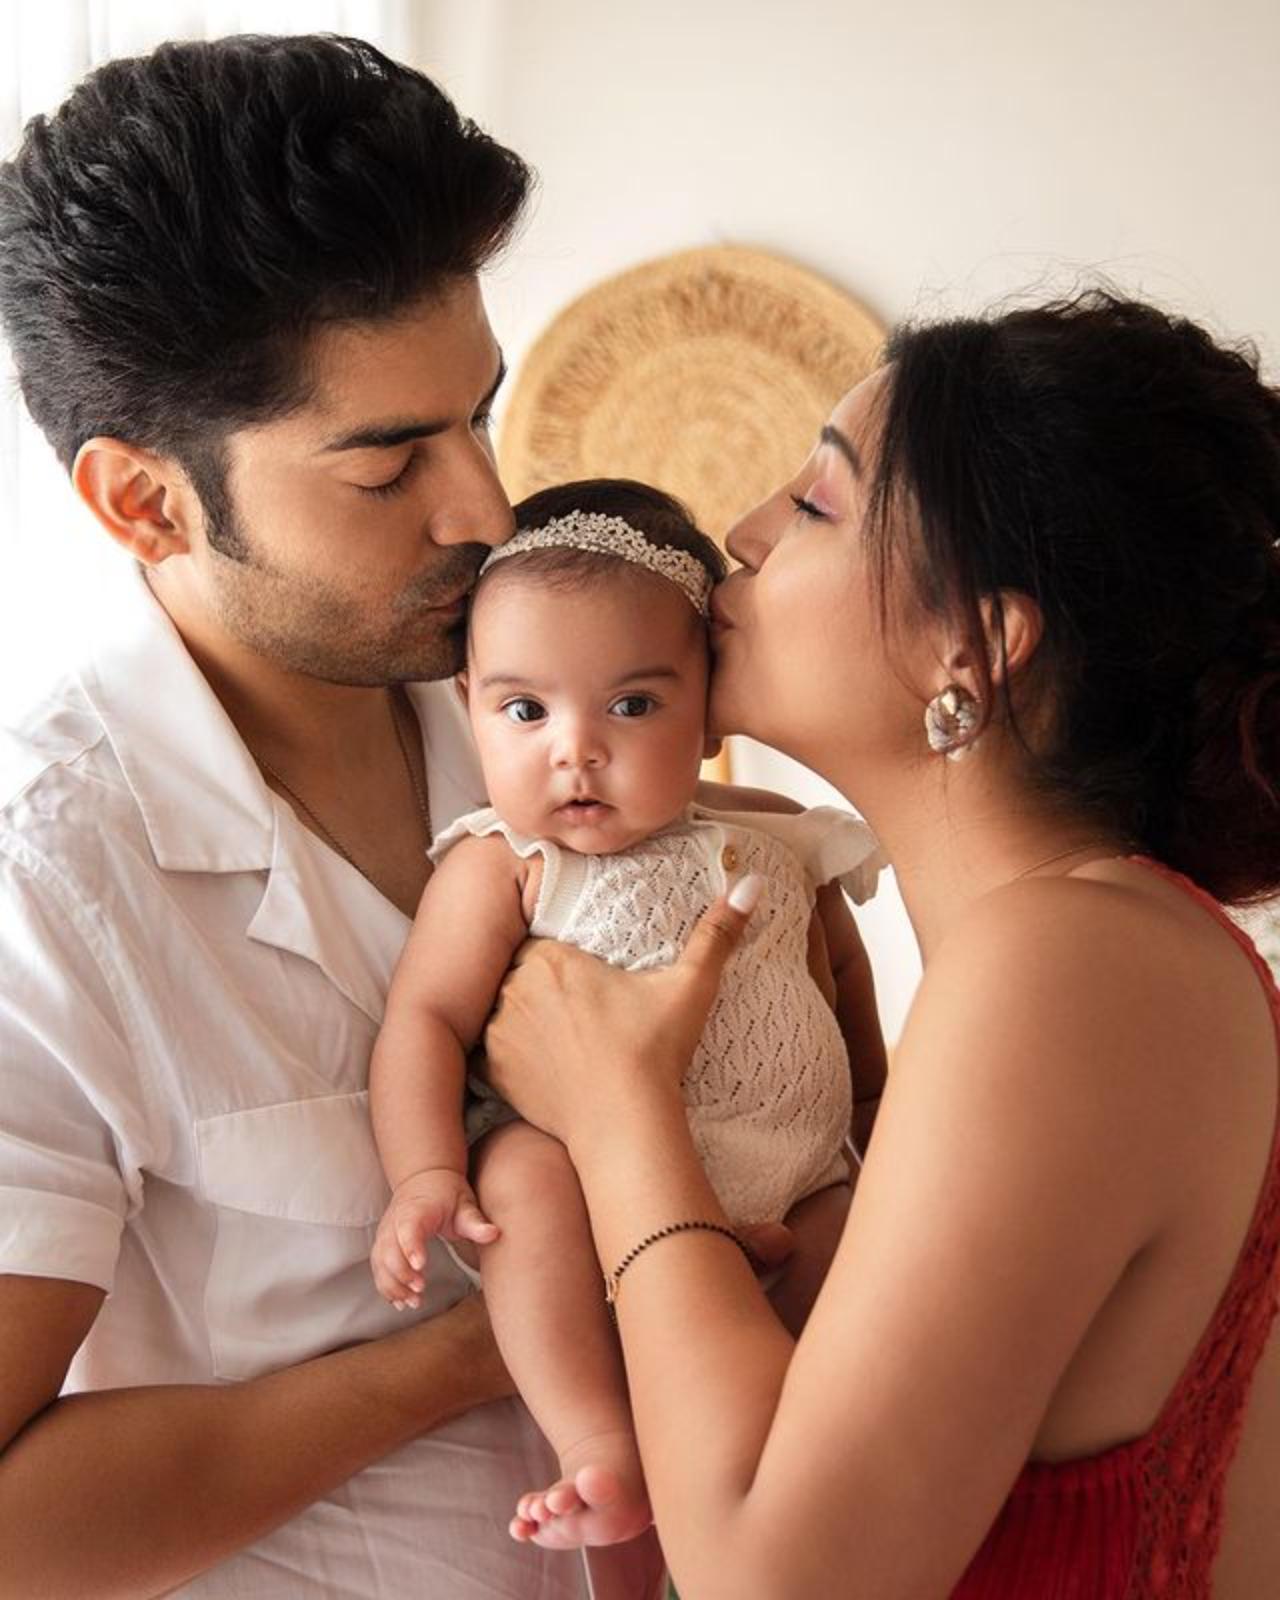 Debina Bonnerjee and Gurmeet Choudhary, who married in 2011, welcomed their daughter Lianna on April 3, 2022